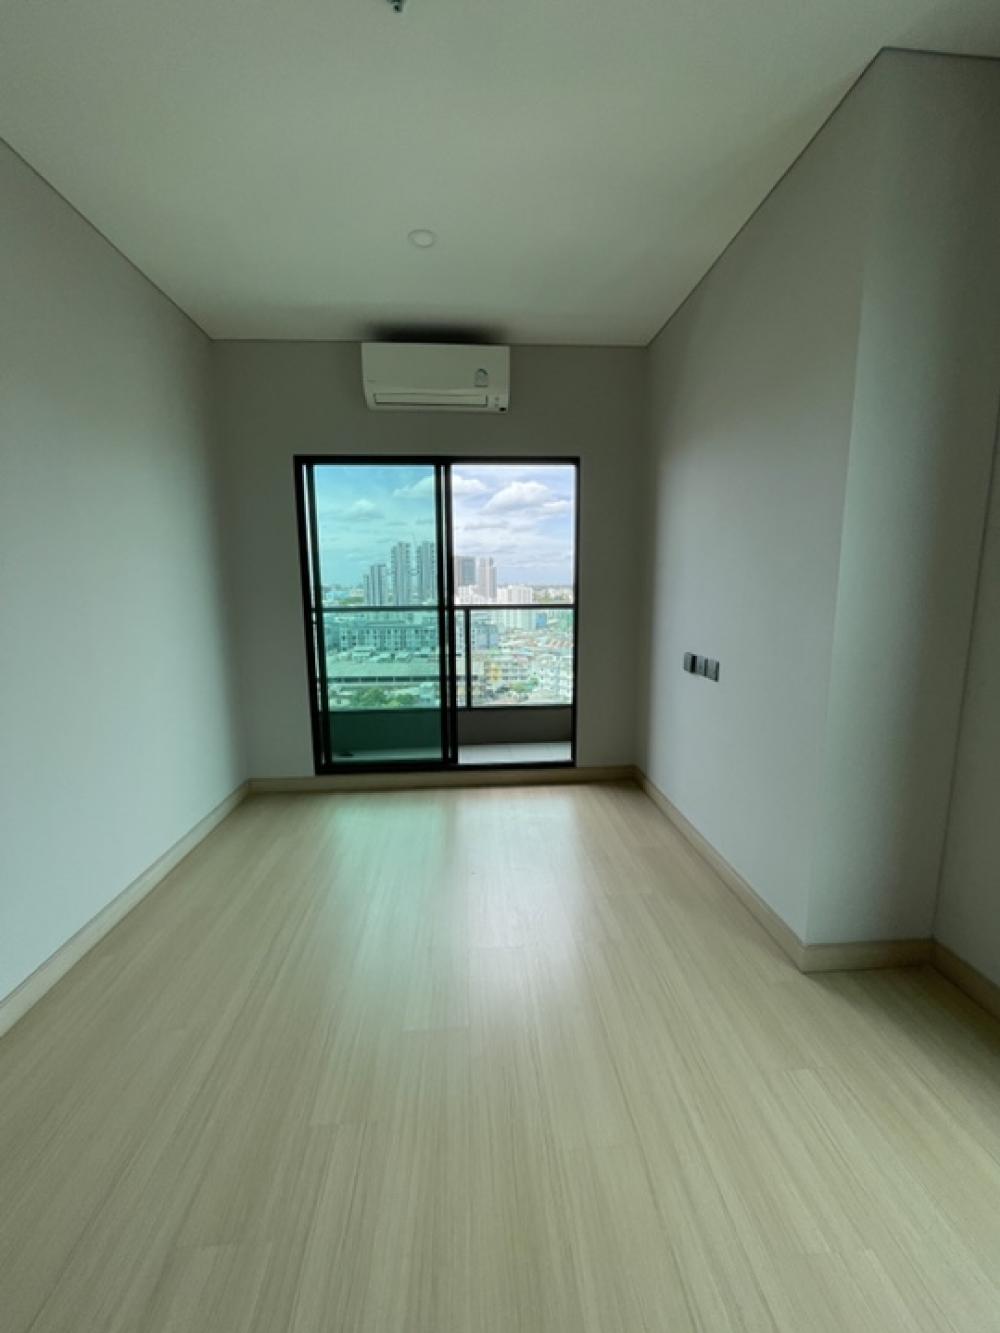 For SaleCondoKasetsart, Ratchayothin : Condo for sale, Lumpini Park Phahon 32, 14th floor, usable area 31.00 sq.m., 1 bedroom, 1 bathroom, beautiful view, quiet room, next to the main road, convenient to travel near the green line BTS Senanikom and BTS Ratchayothin. large central The location